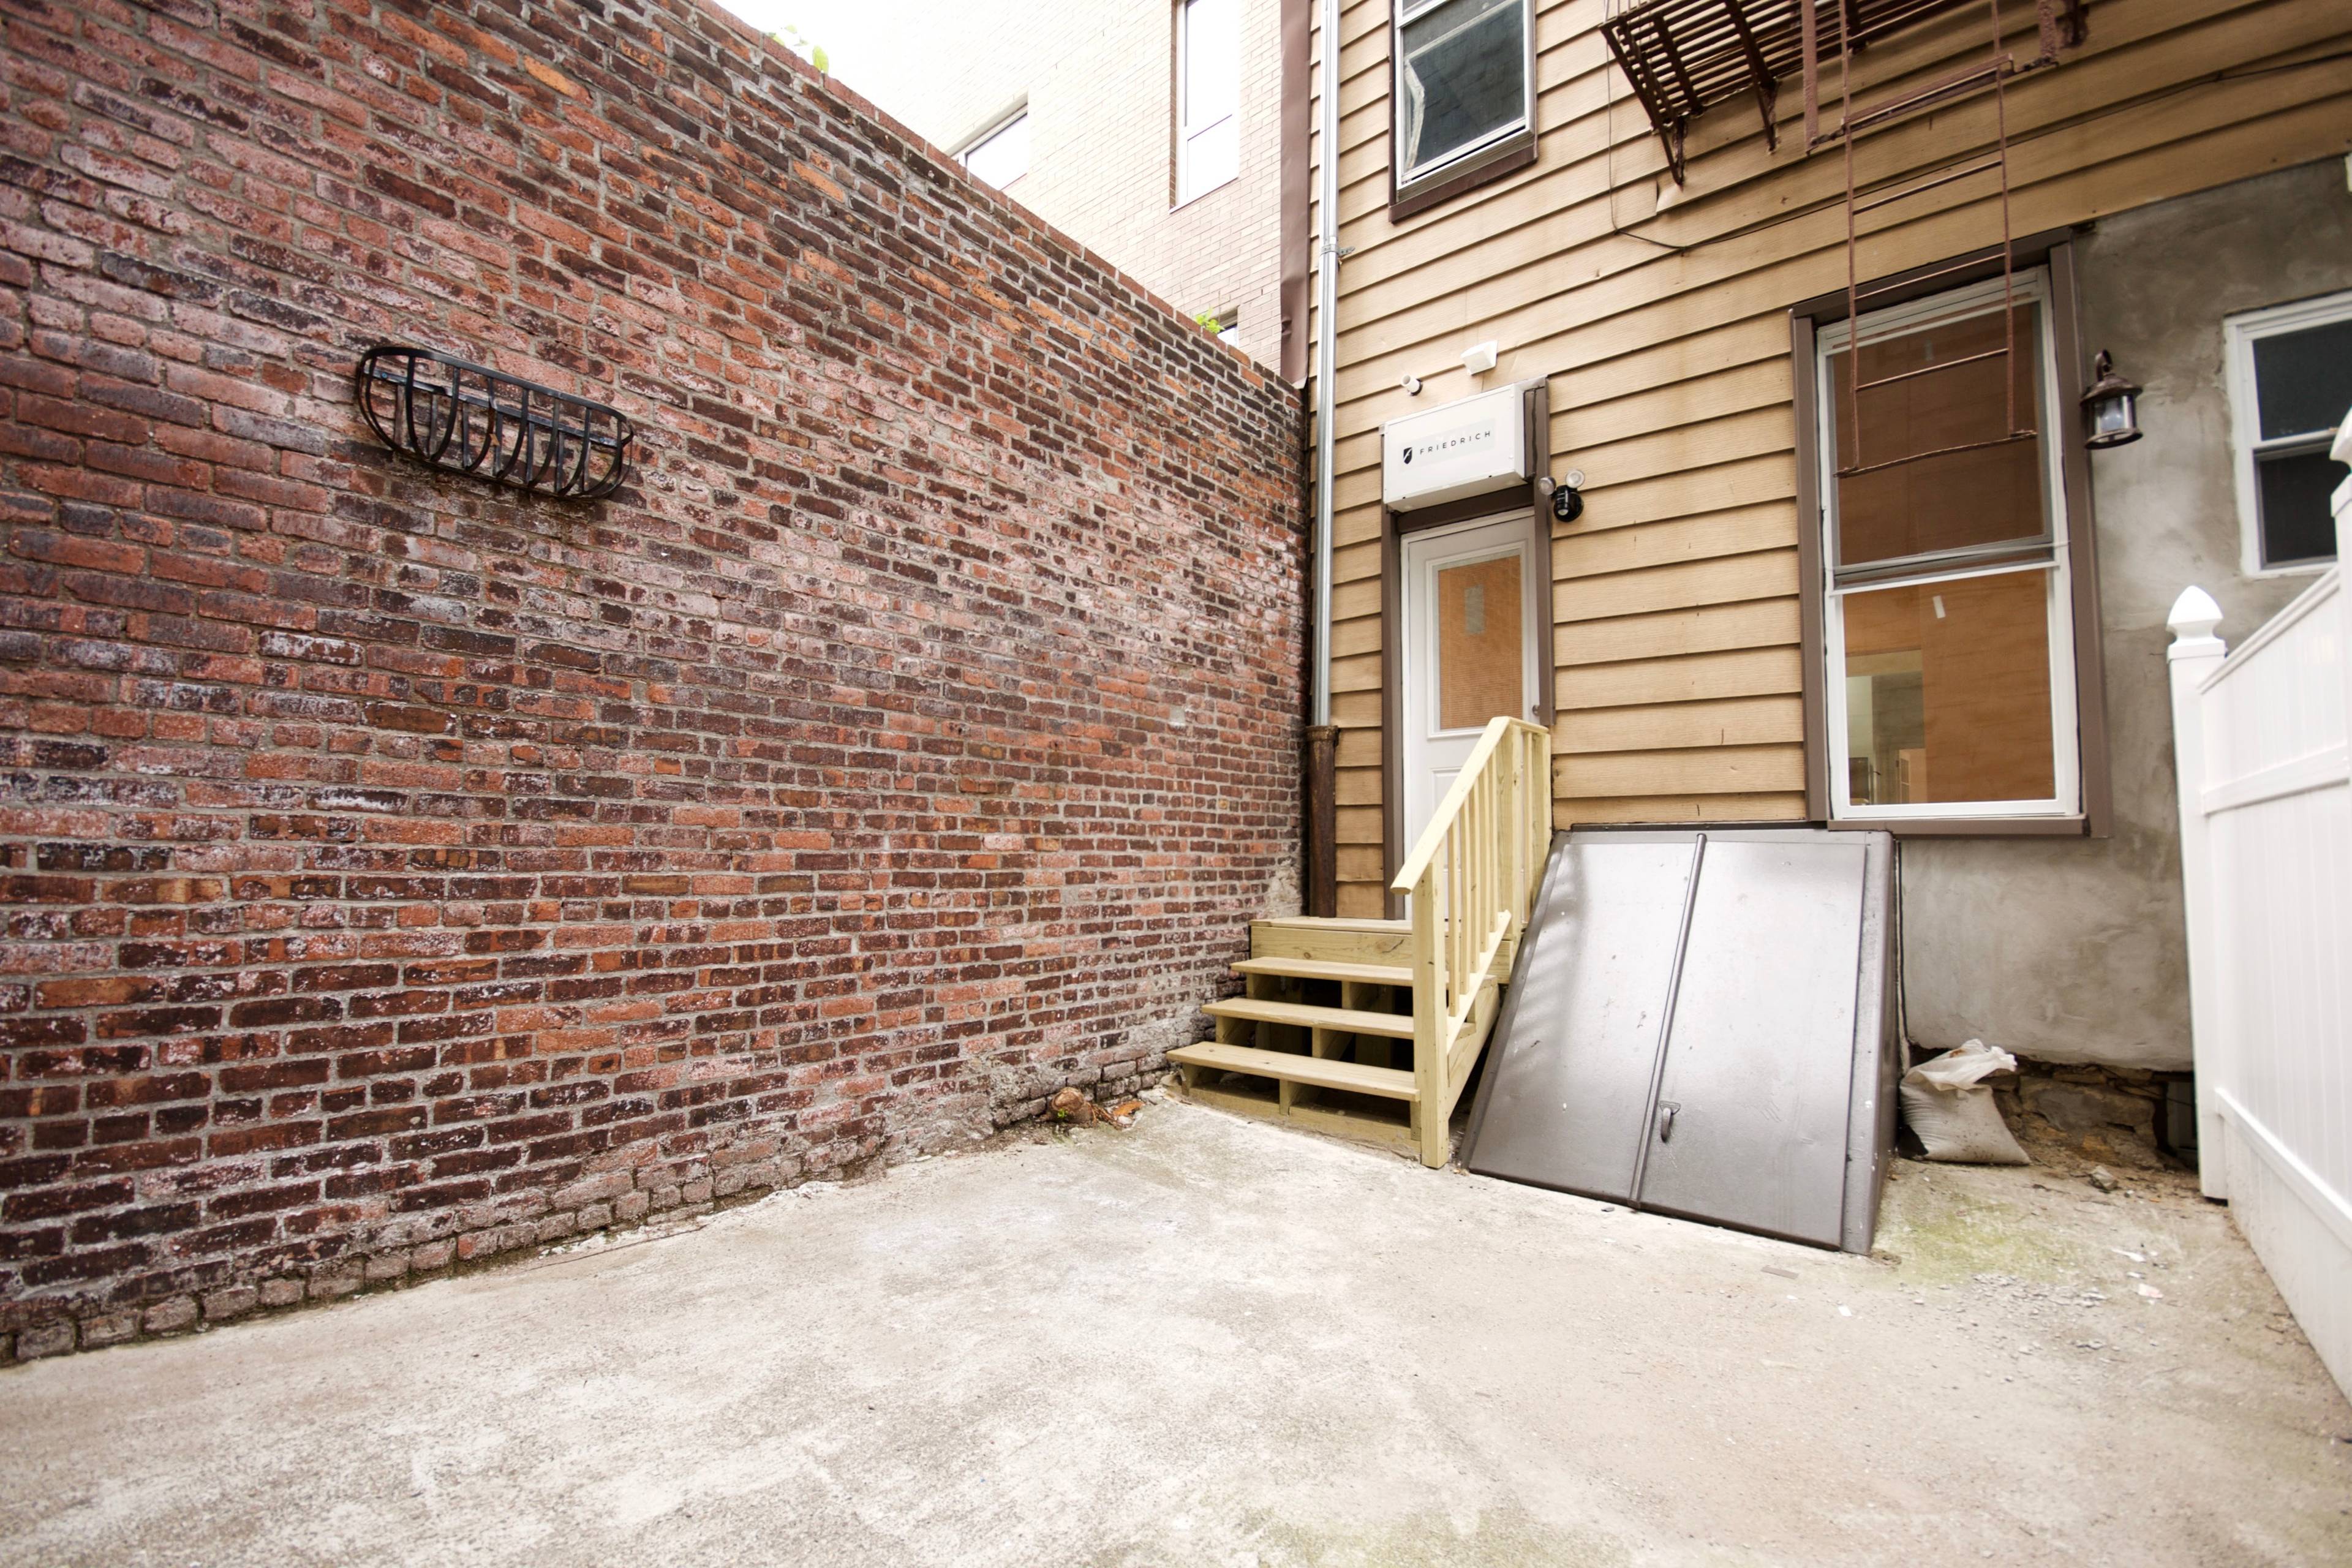 HUGE 1BR WITH WASHER/DRYER AND A PRIVATE YARD, JUST IN TIME FOR BBQ SEASON!